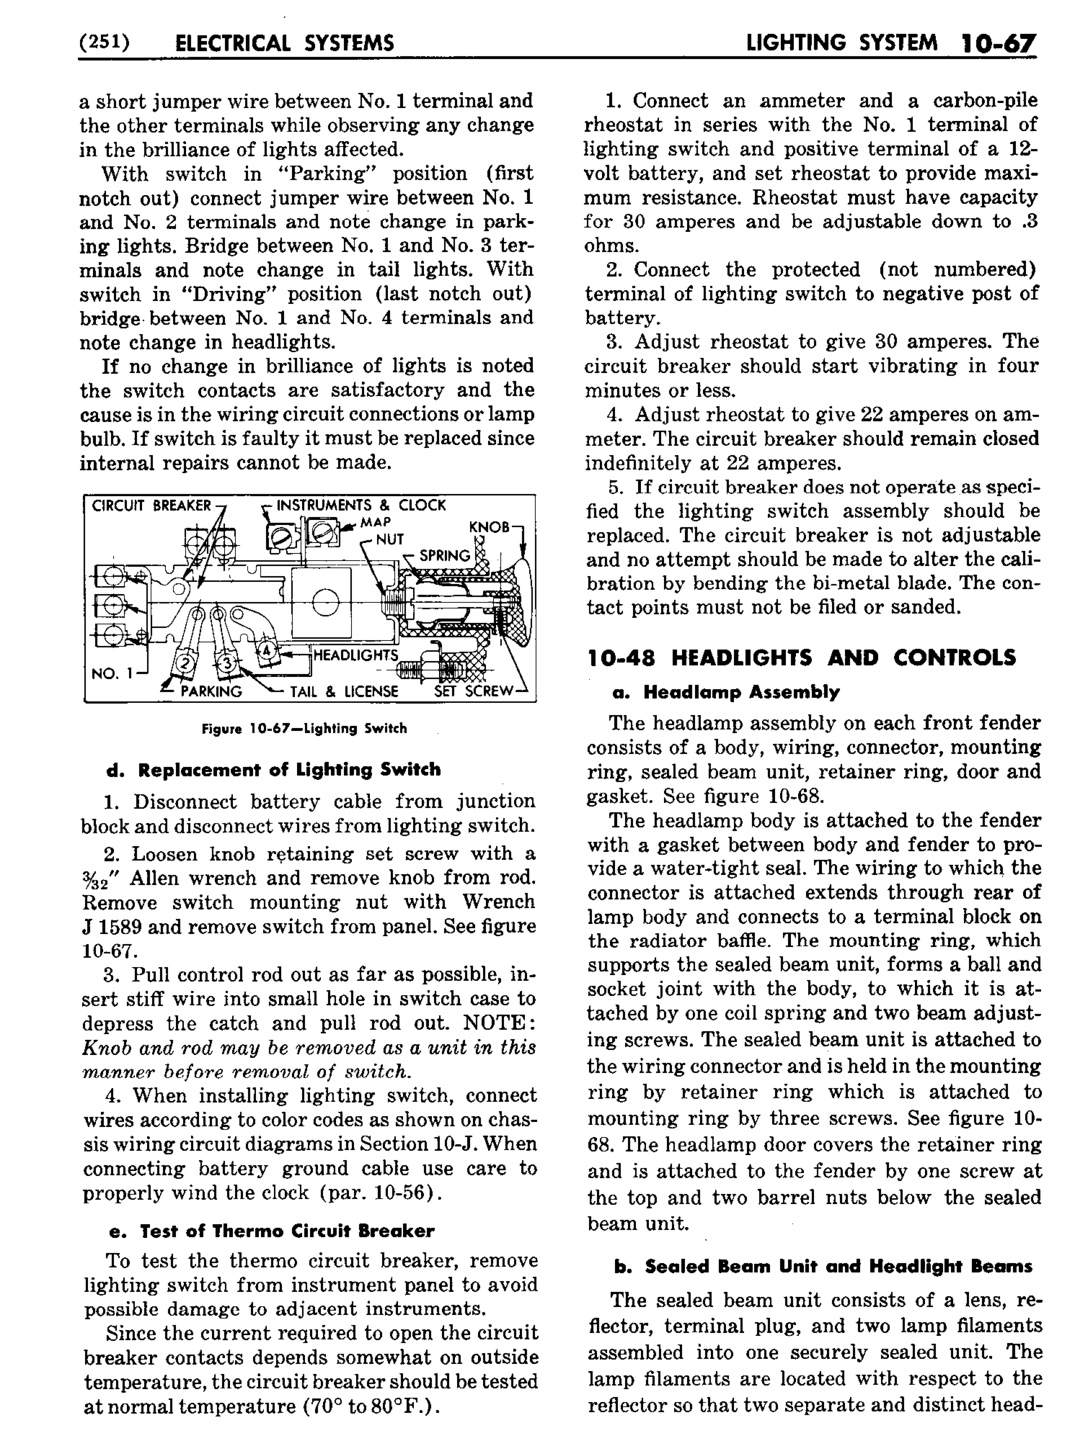 n_11 1953 Buick Shop Manual - Electrical Systems-068-068.jpg